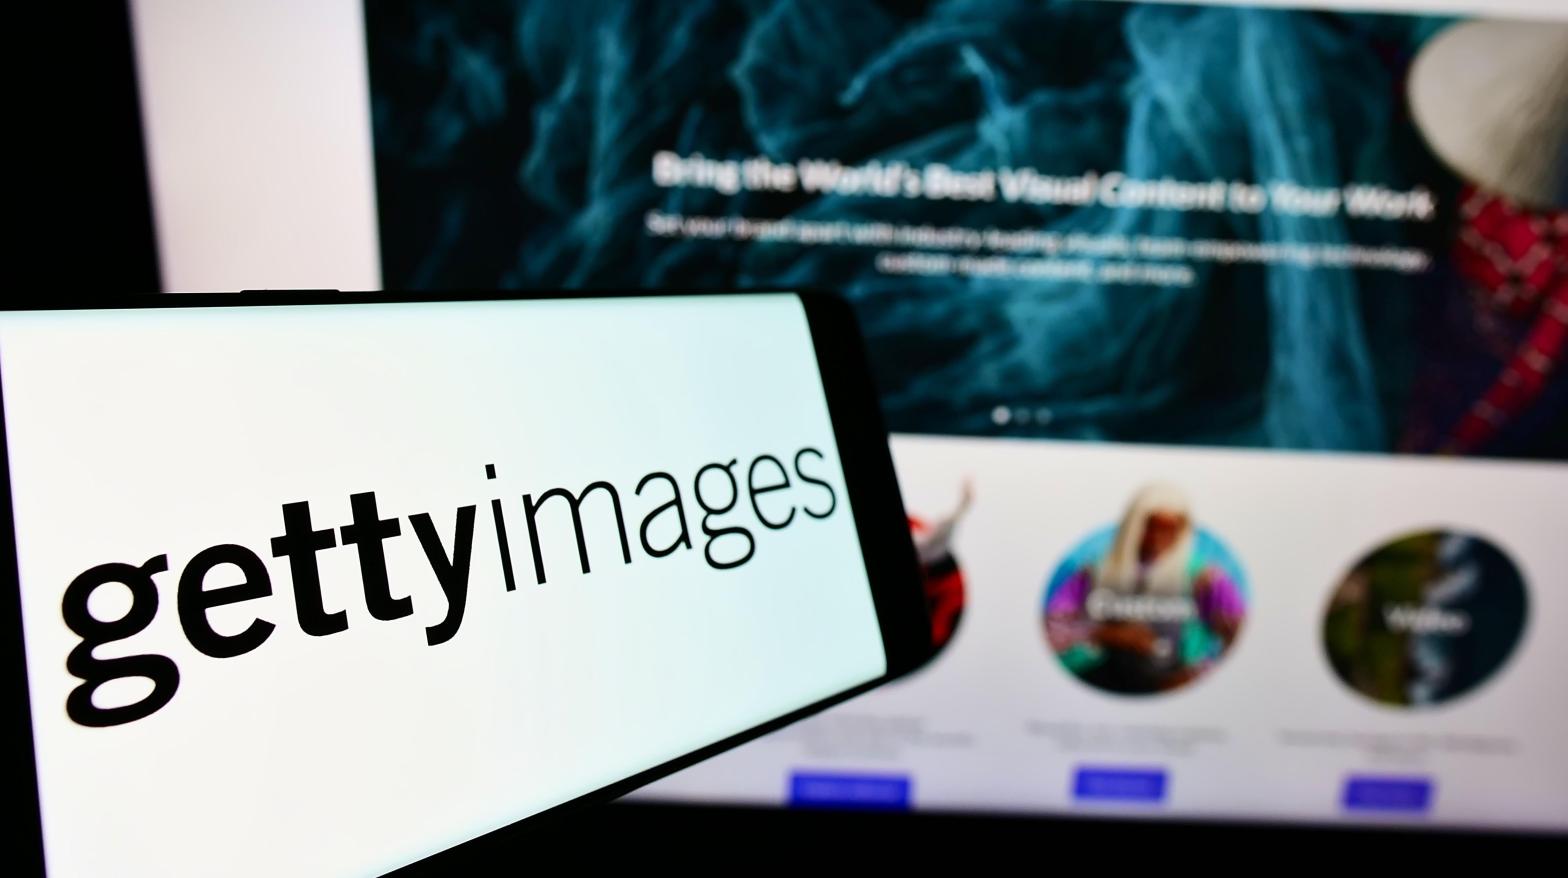 Getty Images is fine with altered photos or artistic images, so long as they were created by human hands. (Photo: Wirestock Creators, Shutterstock)